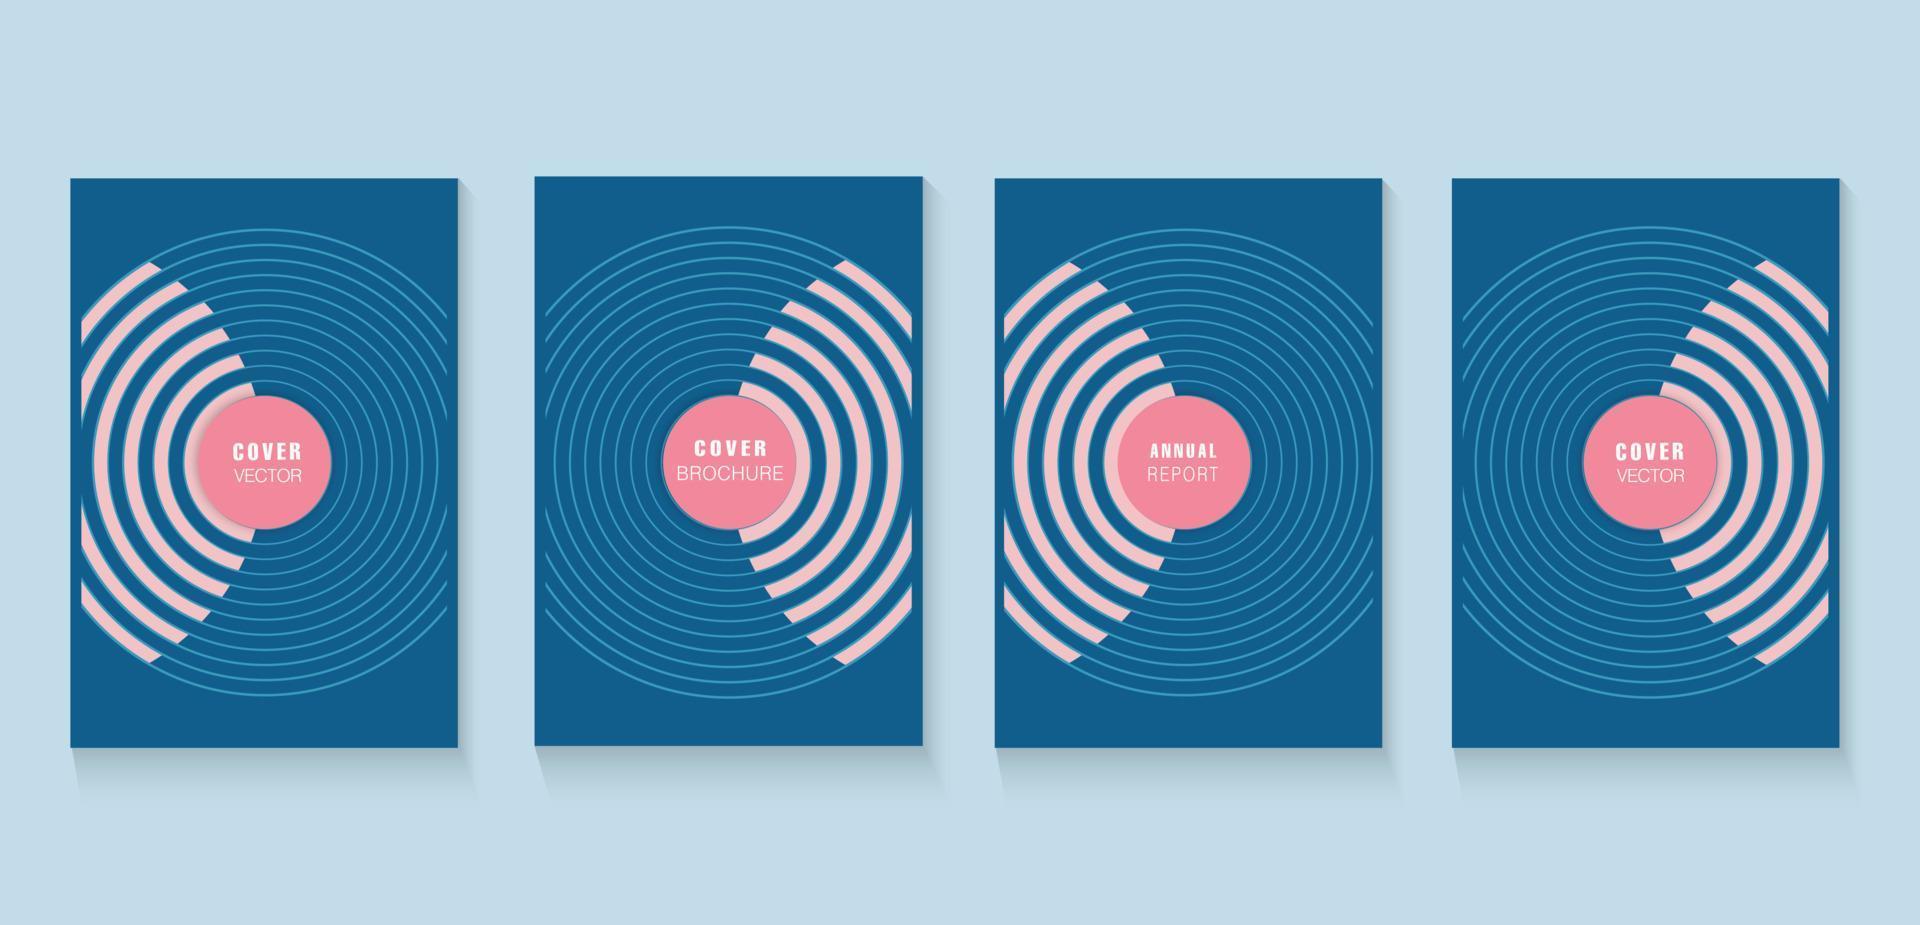 Modern Covers Template Design lines shapes in soft blue colors vector